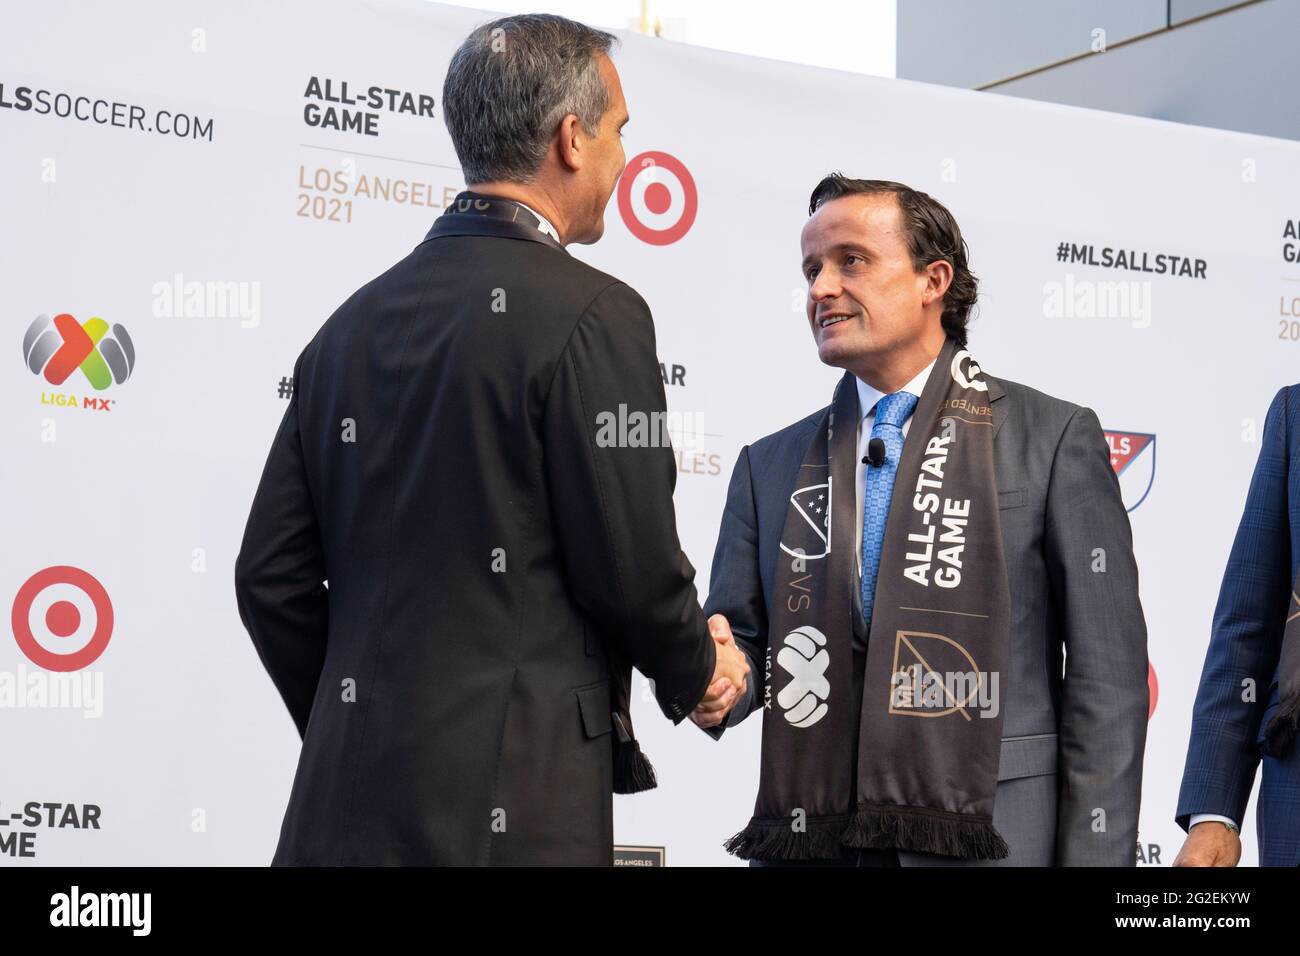 LIGA MX Executive President Mikel Arriola and Mayor of Los Angeles Eric Garcetti greet during a MLS and LIGA MX press announcement at Banc of Californ Stock Photo